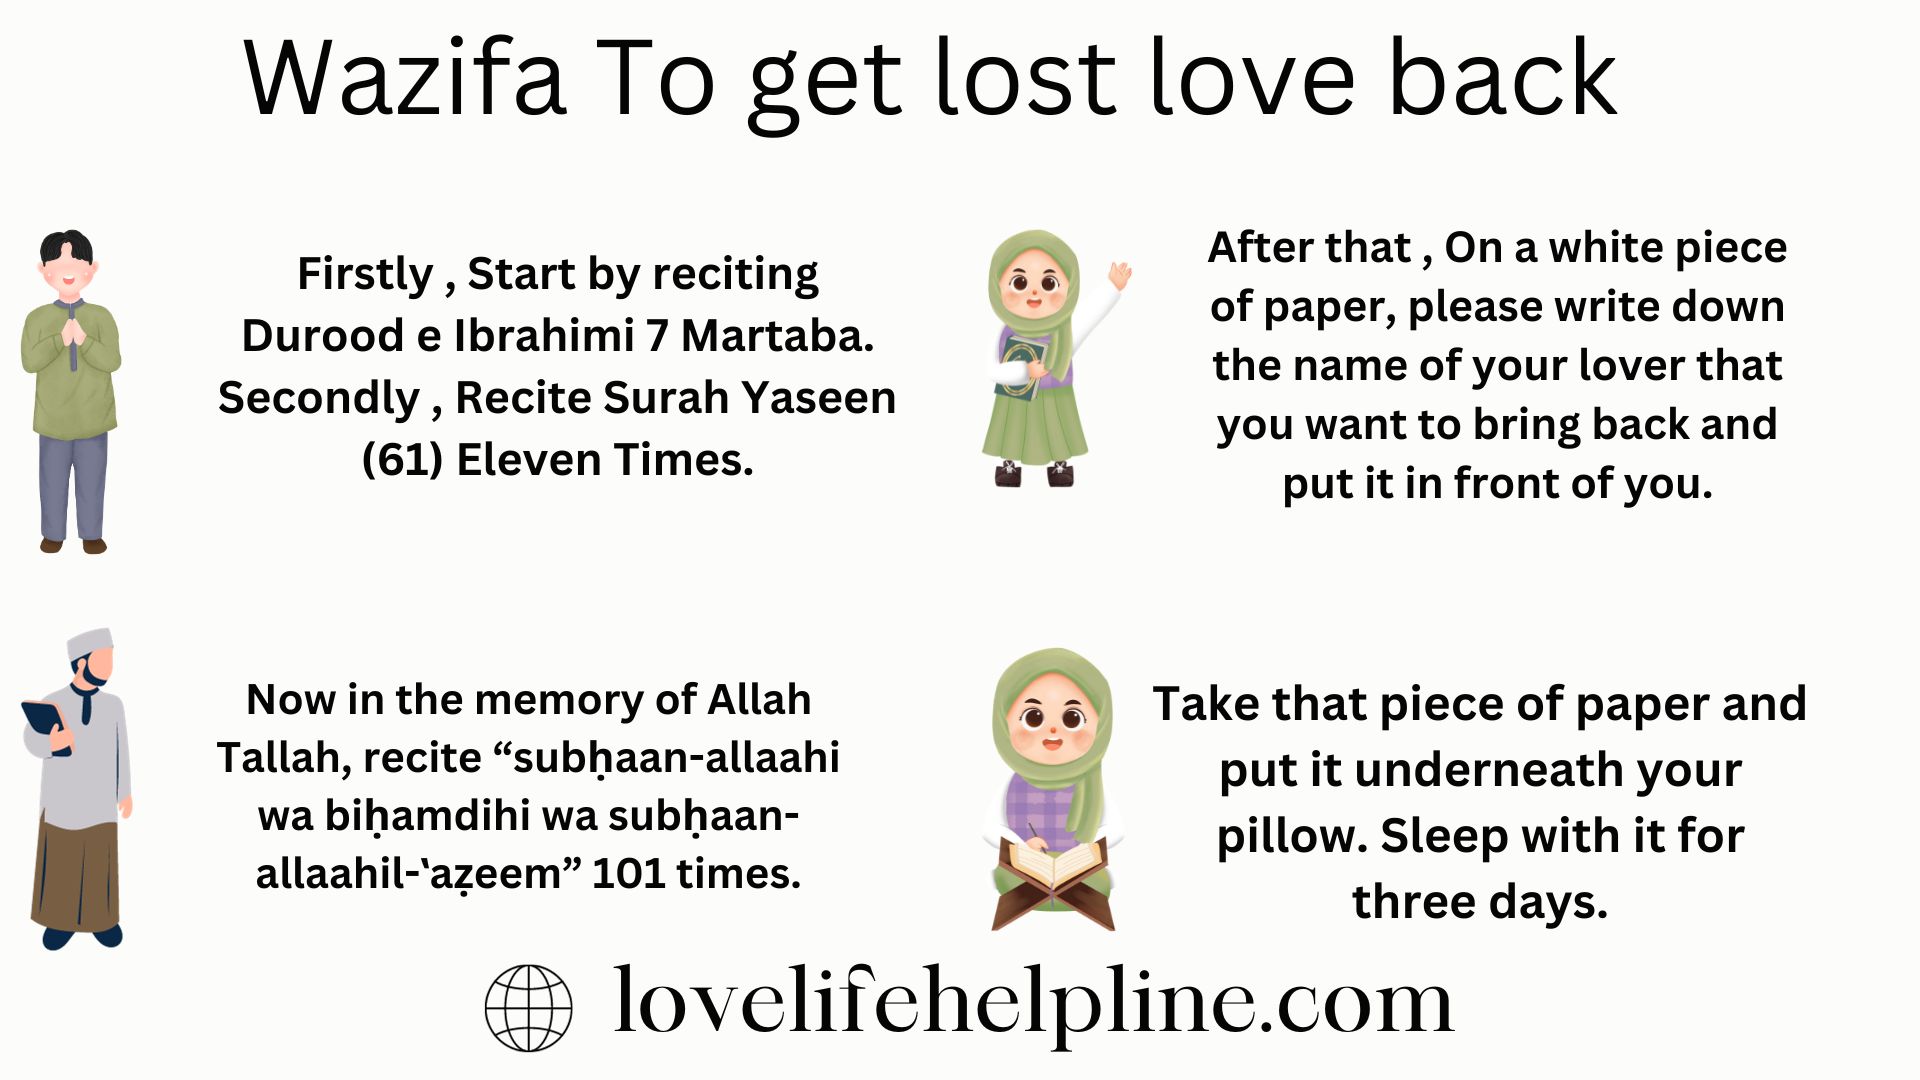 Wazifa To get Lost Love Back